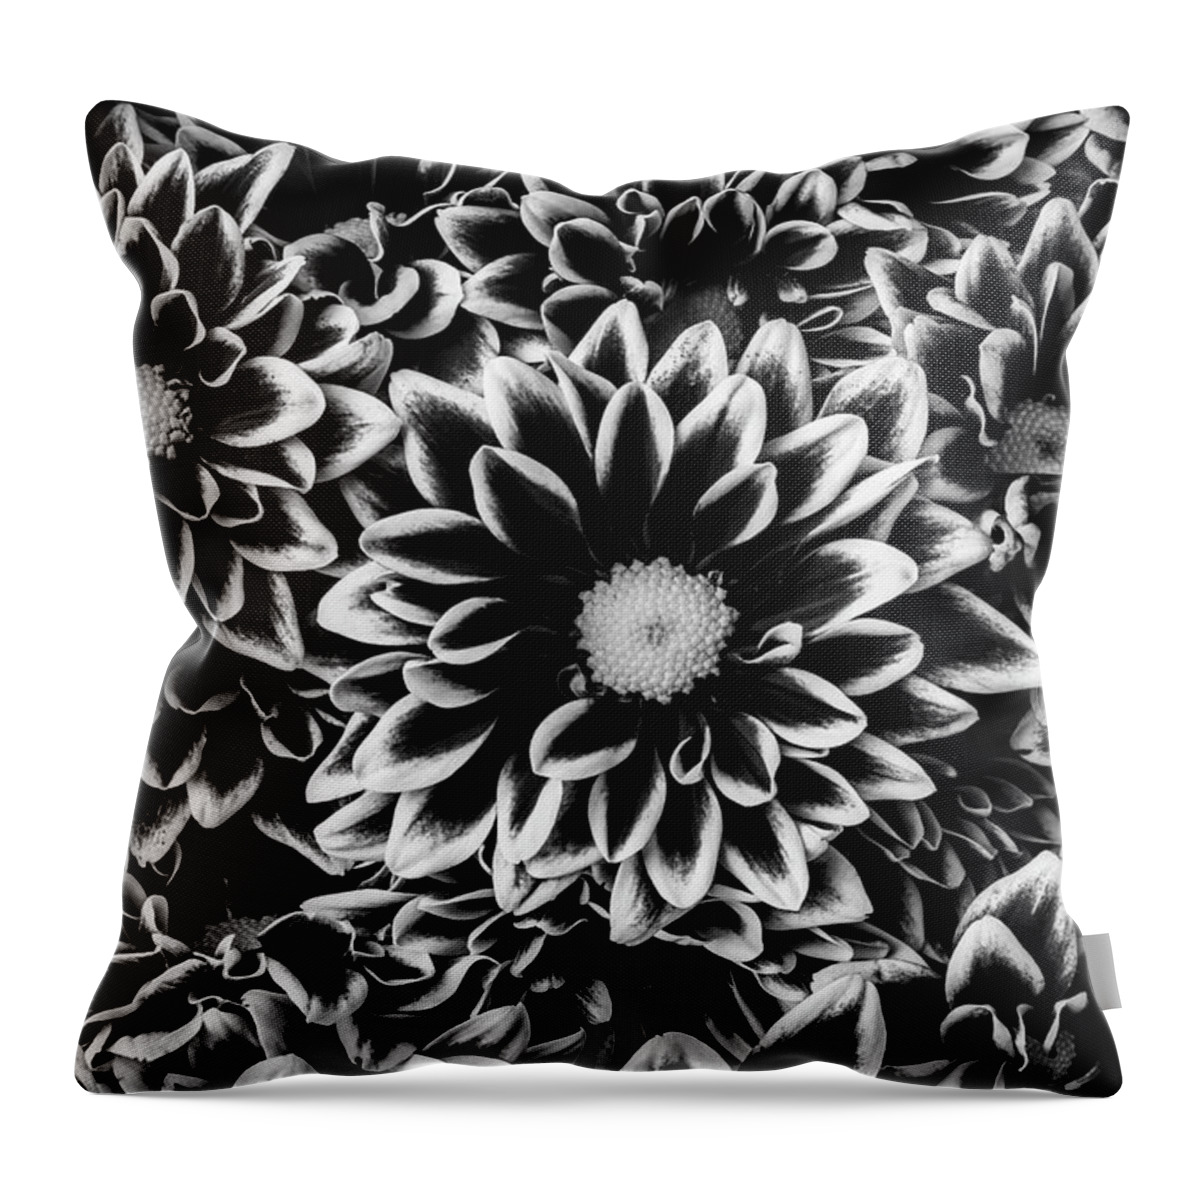 Pom Throw Pillow featuring the photograph Black And White Poms by Garry Gay